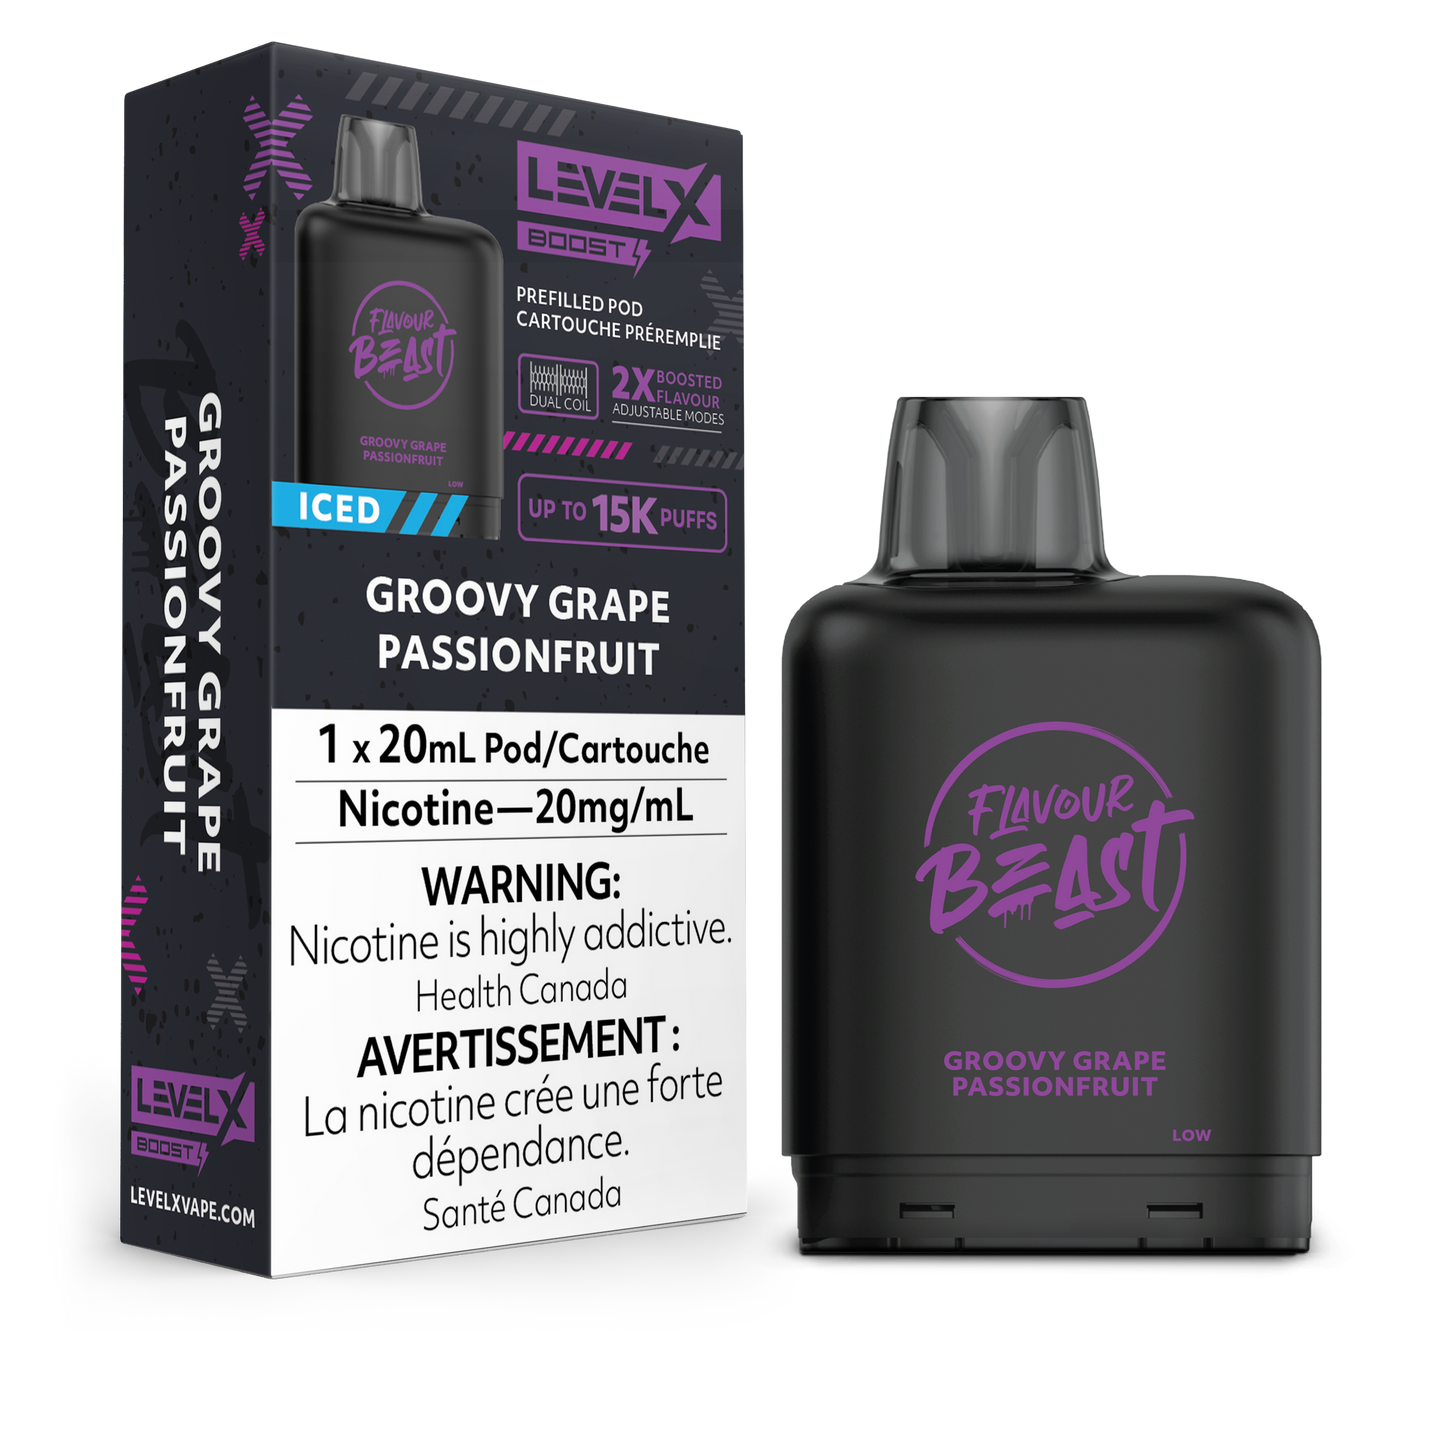 Level X Boost Pod - Flavour Beast - Groovy Grape Passionfruit Iced